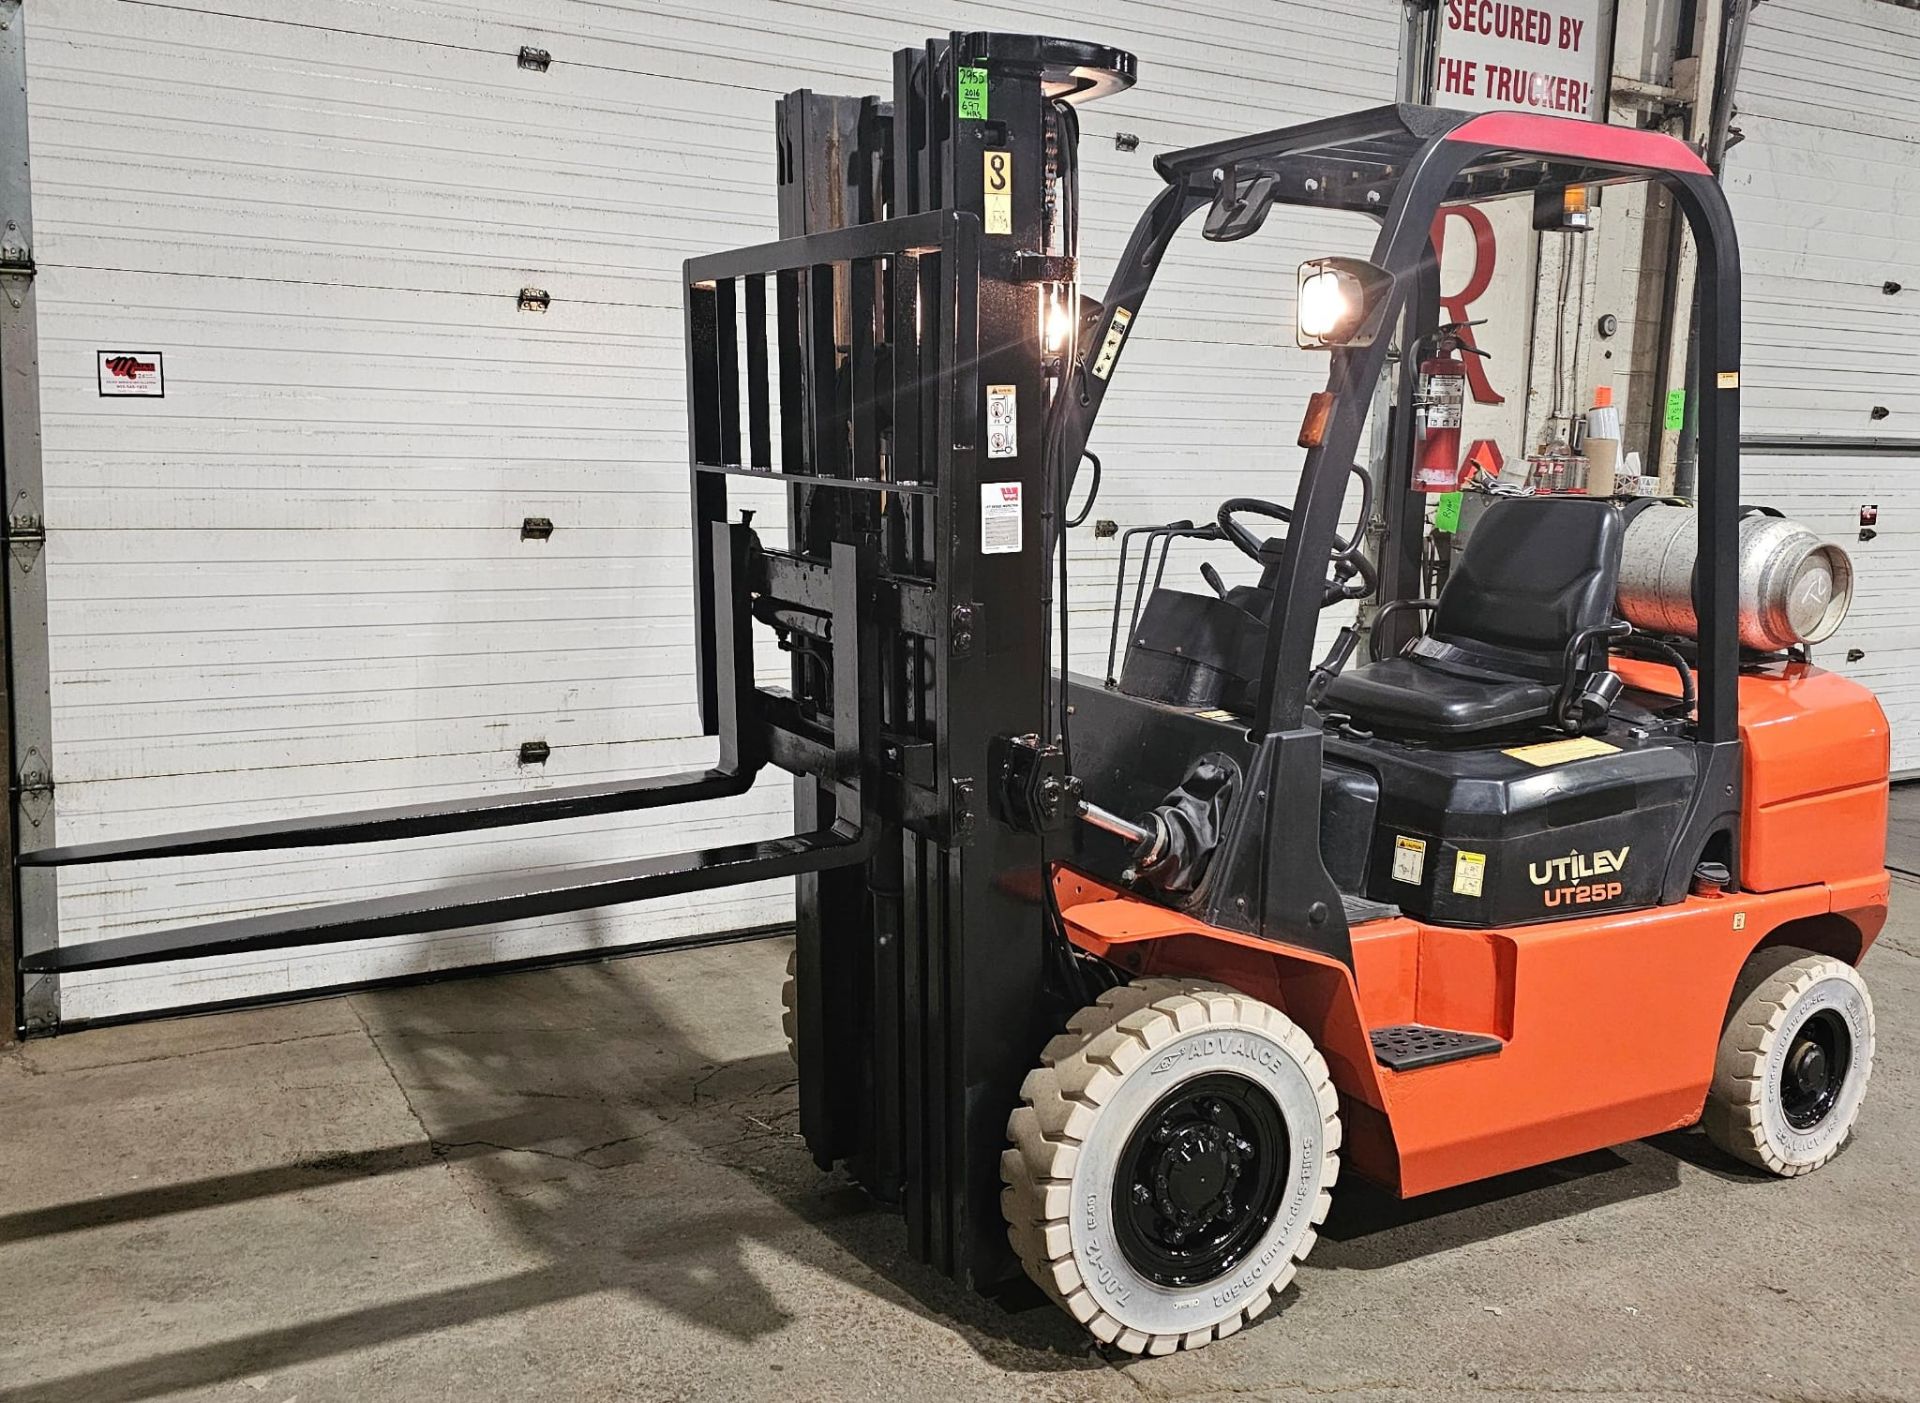 2016 Utilev 5,000lbs Capacity LPG (Propane) OUTDOOR Forklift with sideshift & 3-STAGE MAST & tires - Image 2 of 7